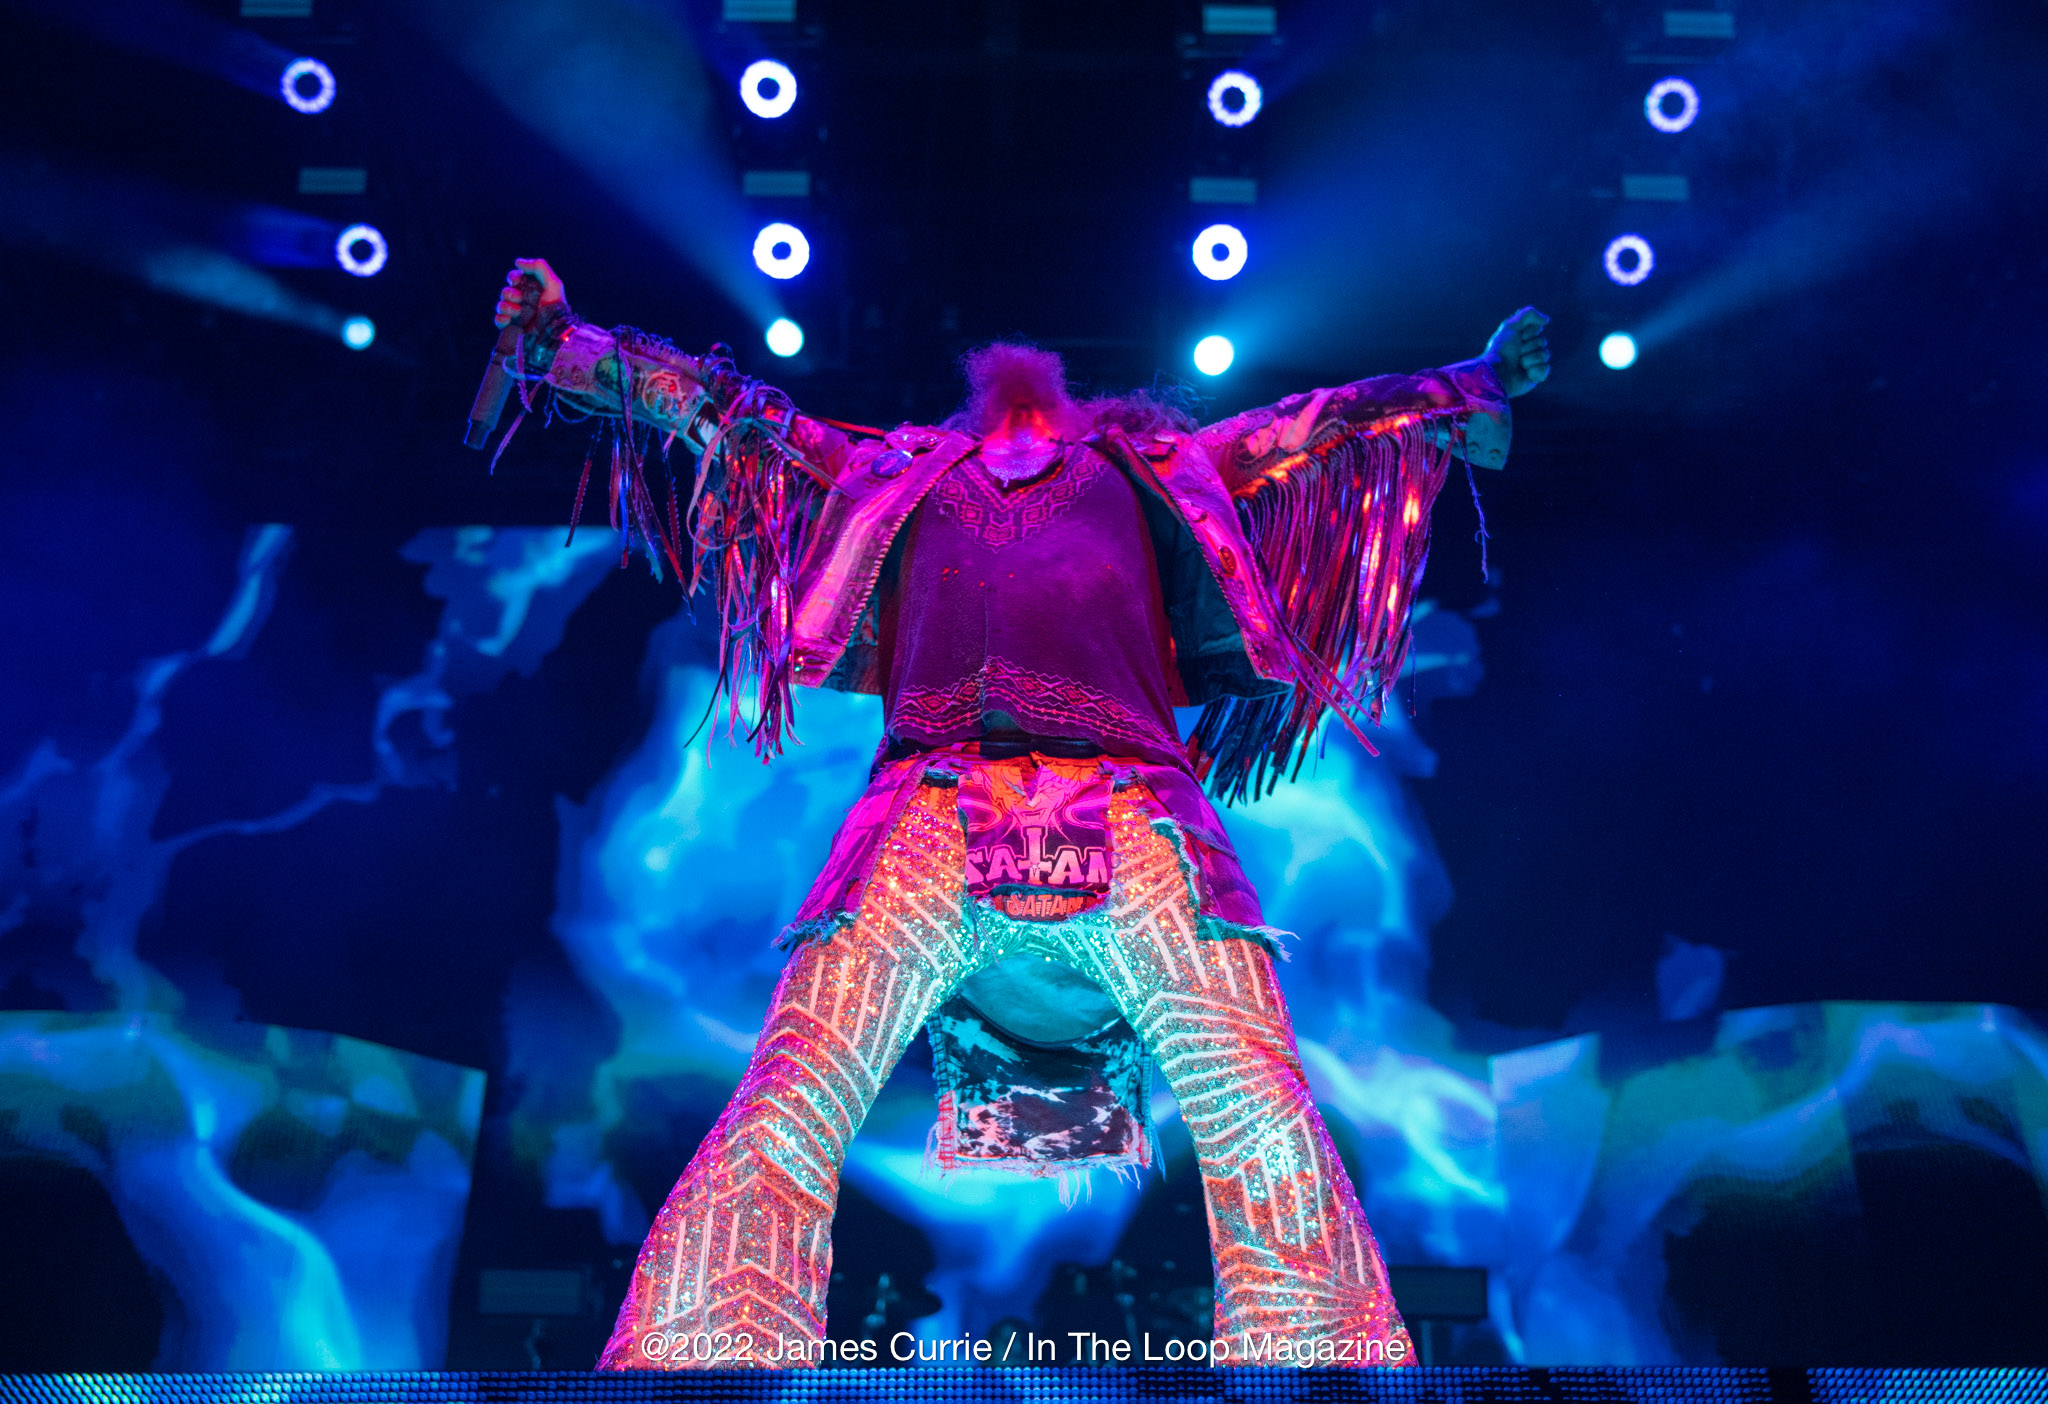 Live Review: Rob Zombie Brings His ‘Freaks on Parade’ Tour Keeping The Horror Themed Music Experience Going For Generations Of Fans